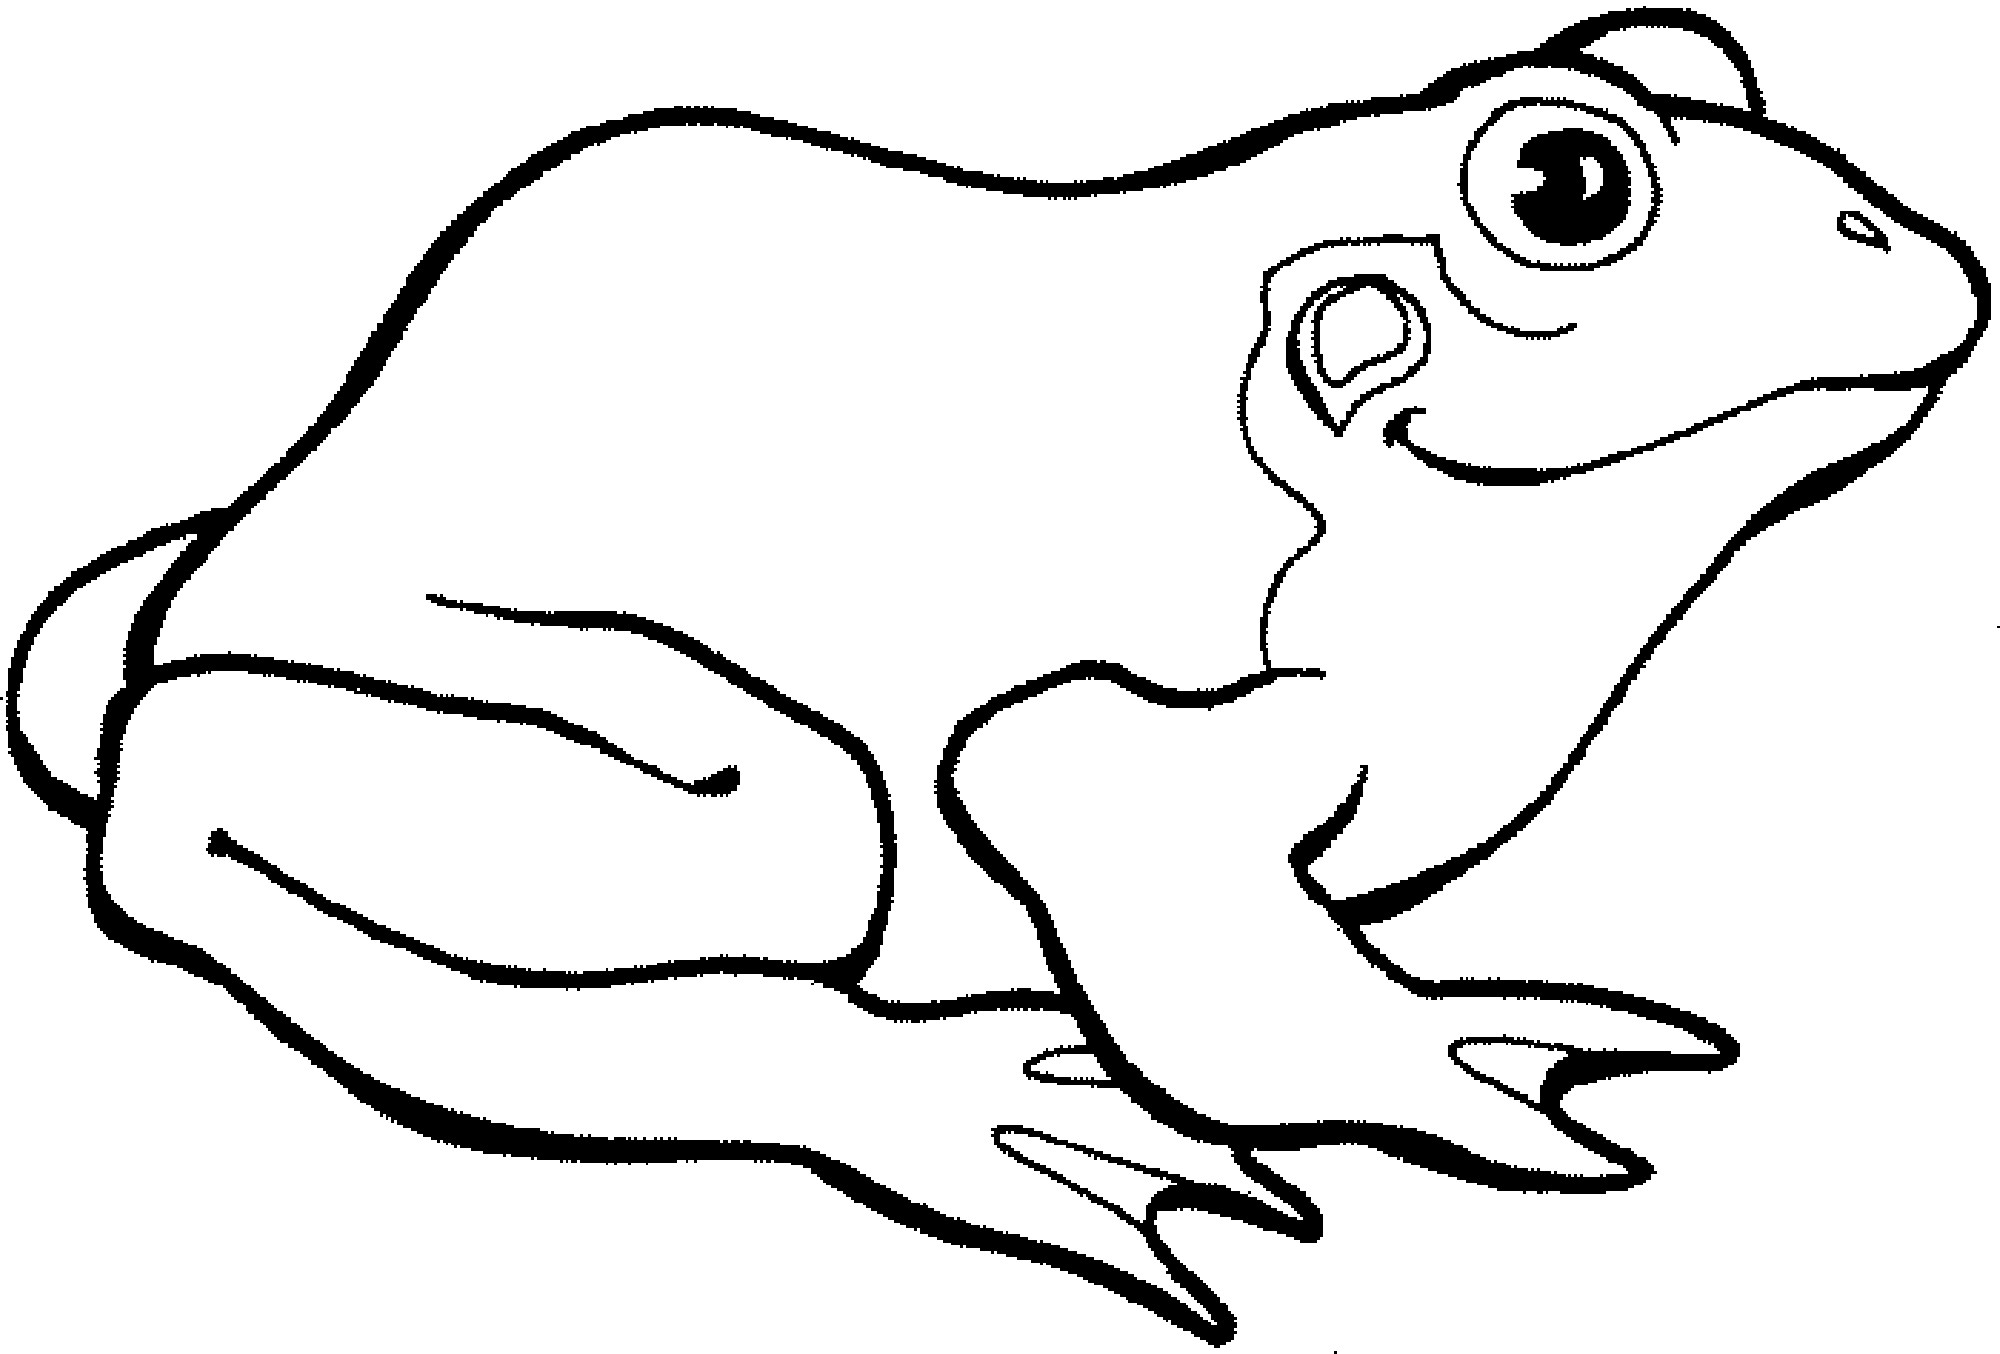 Frog Coloring Pages For Preschoolers at GetDrawings Free download